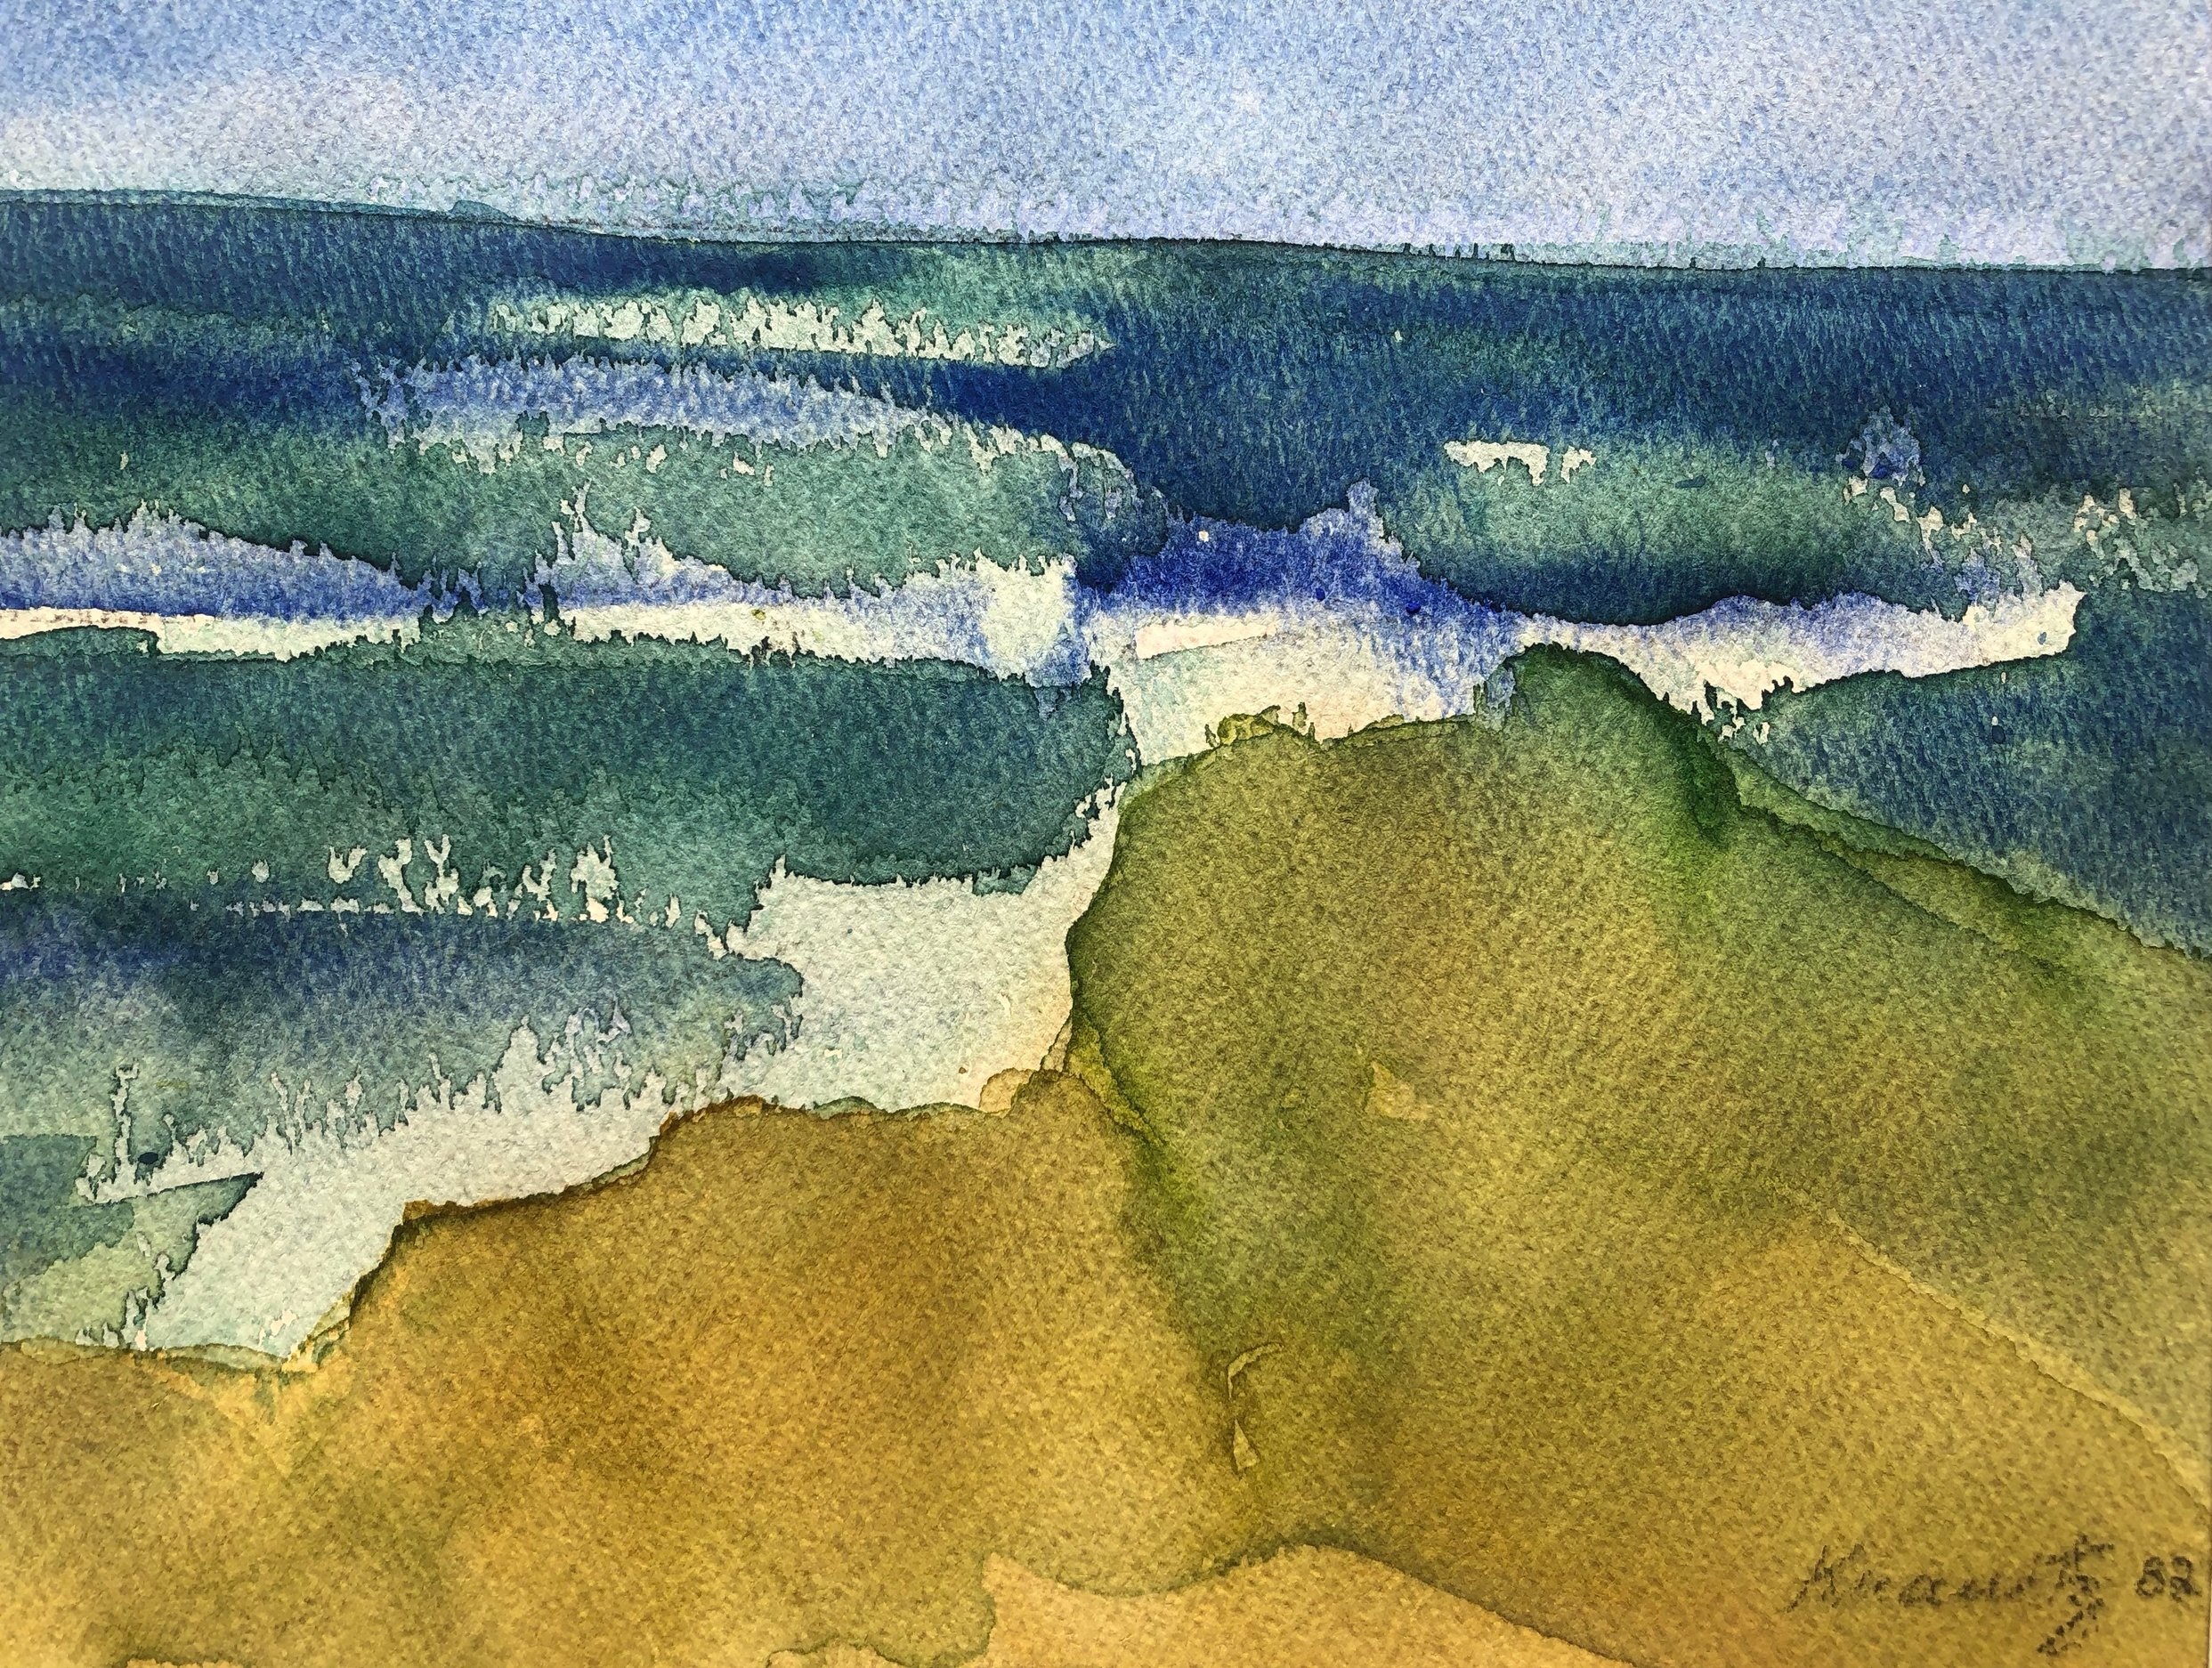 Seashore I, 1982, Watercolor, 14x16 inches with mat